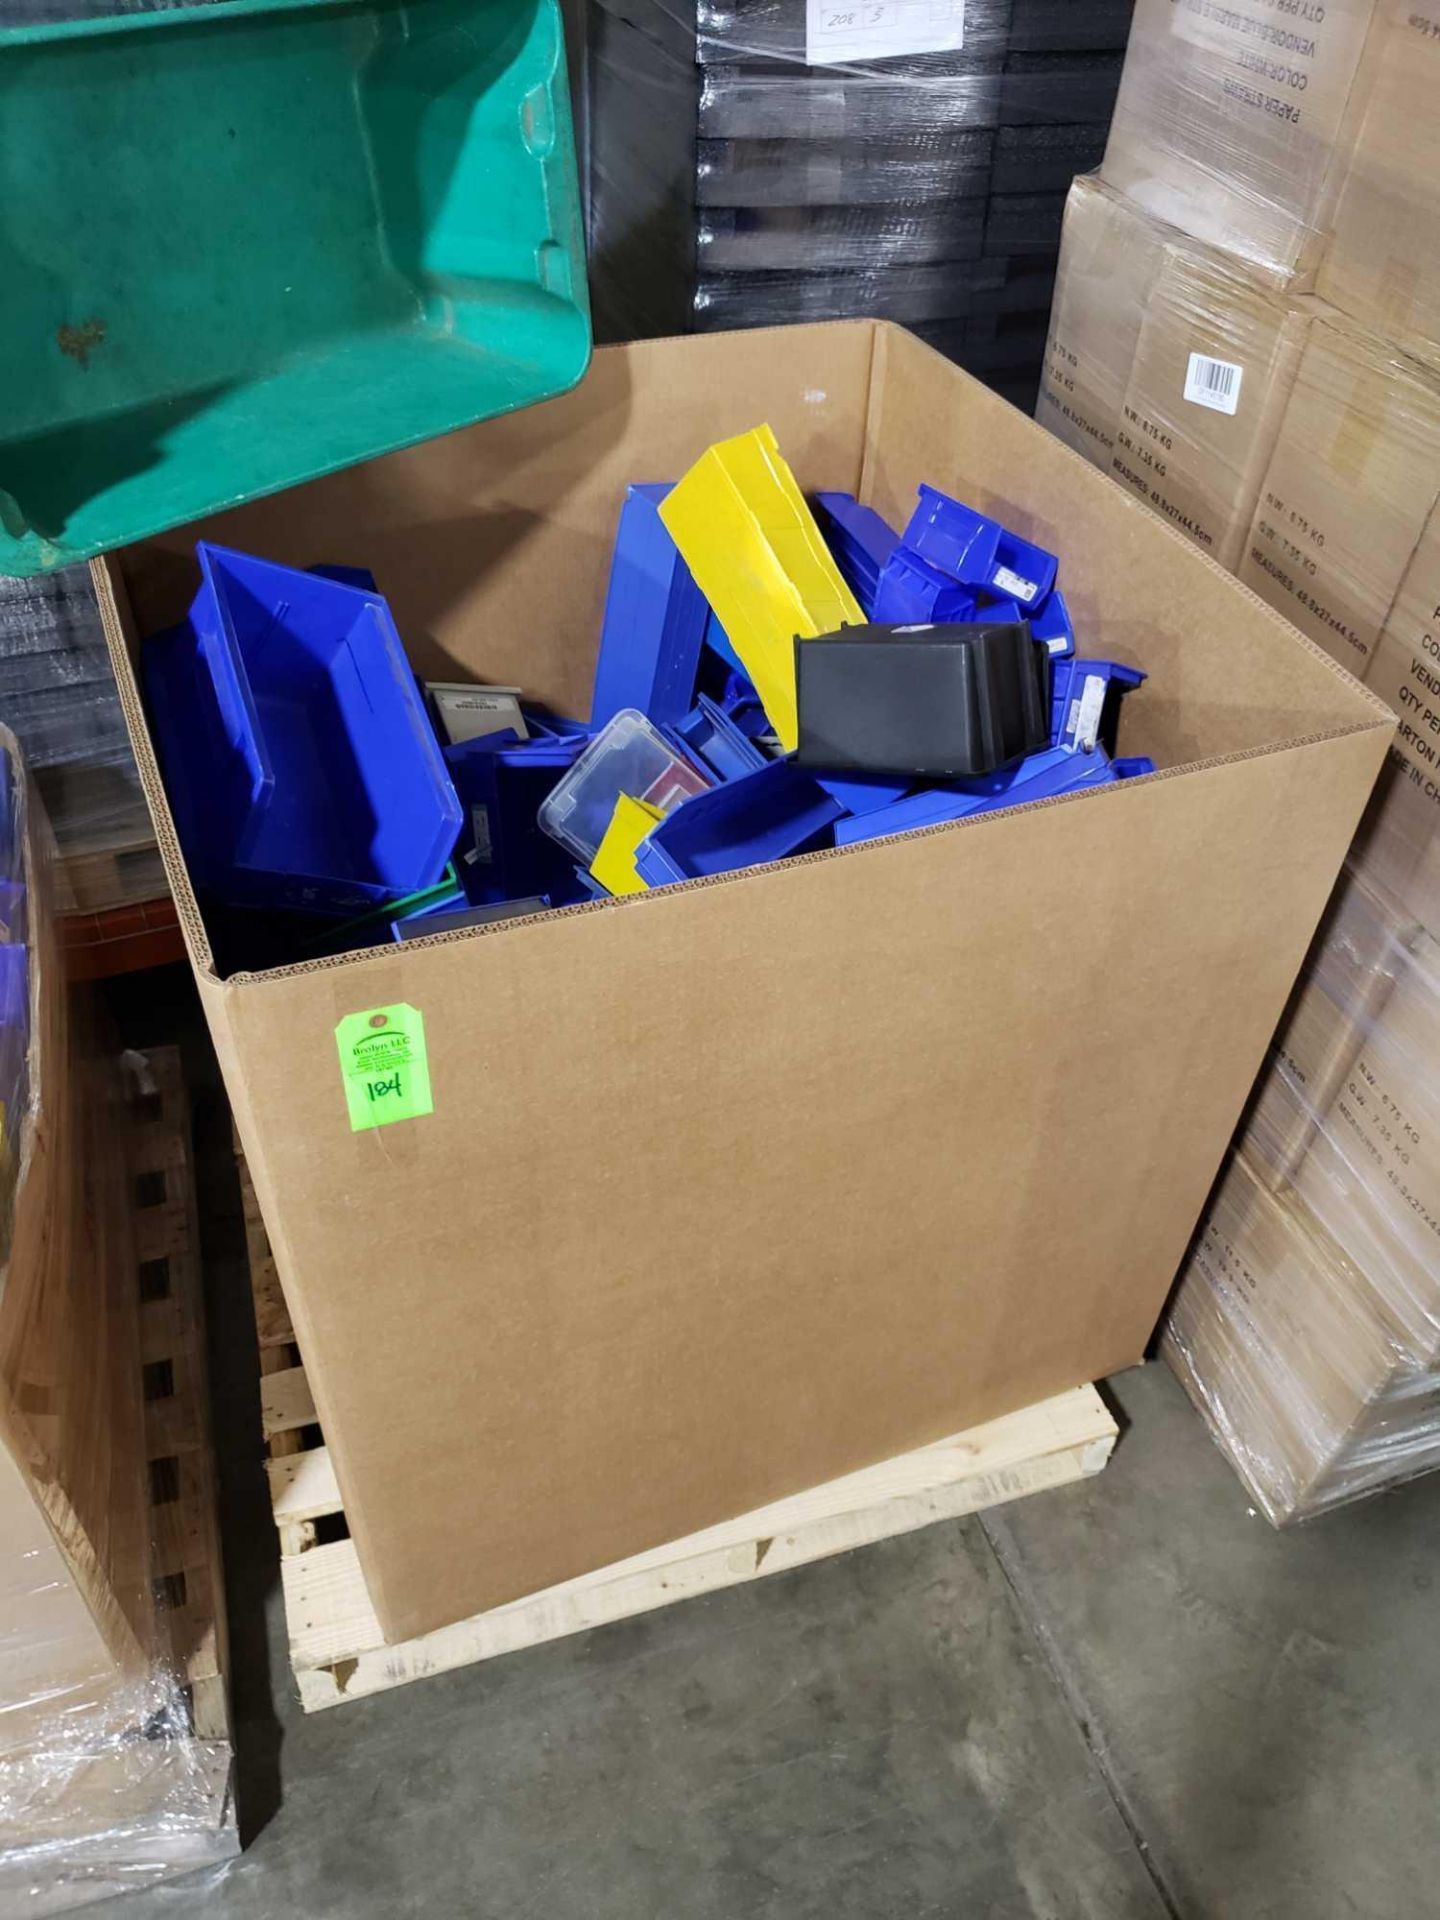 Contents of cardboard gaylord including large quantity of various size and color hanging bins.